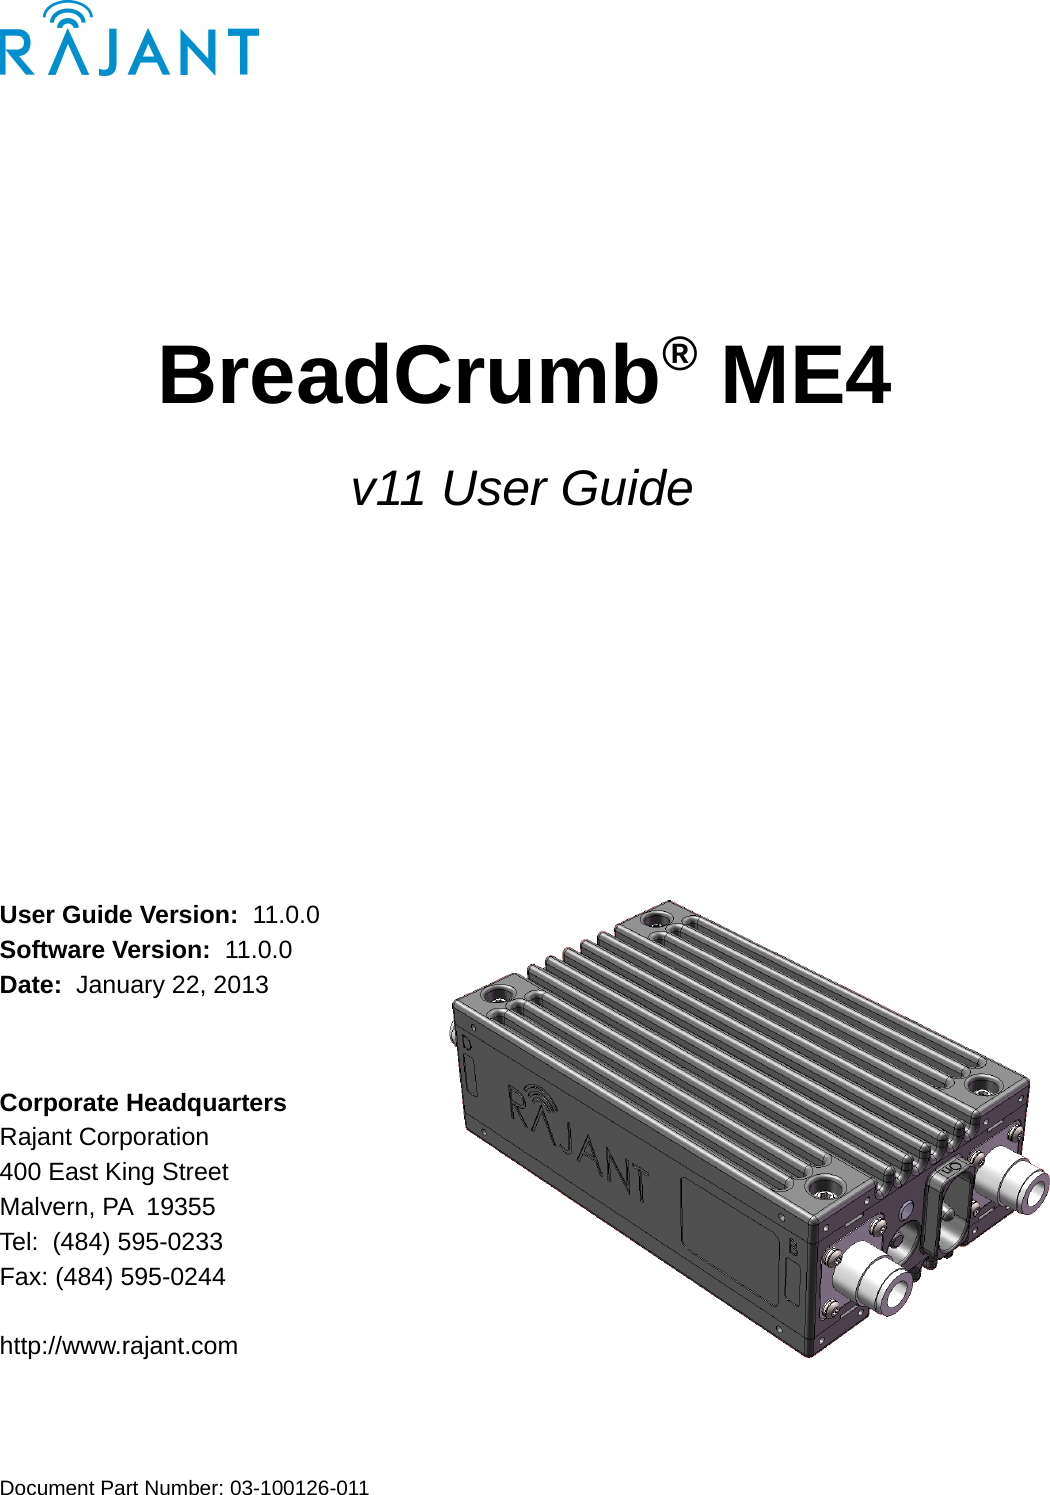 BreadCrumb® ME4v11 User GuideUser Guide Version:  11.0.0Software Version:  11.0.0Date:  January 22, 2013Corporate Headquarters Rajant Corporation 400 East King Street Malvern, PA  19355 Tel:  (484) 595-0233 Fax: (484) 595-0244 http://www.rajant.comDocument Part Number: 03-100126-011